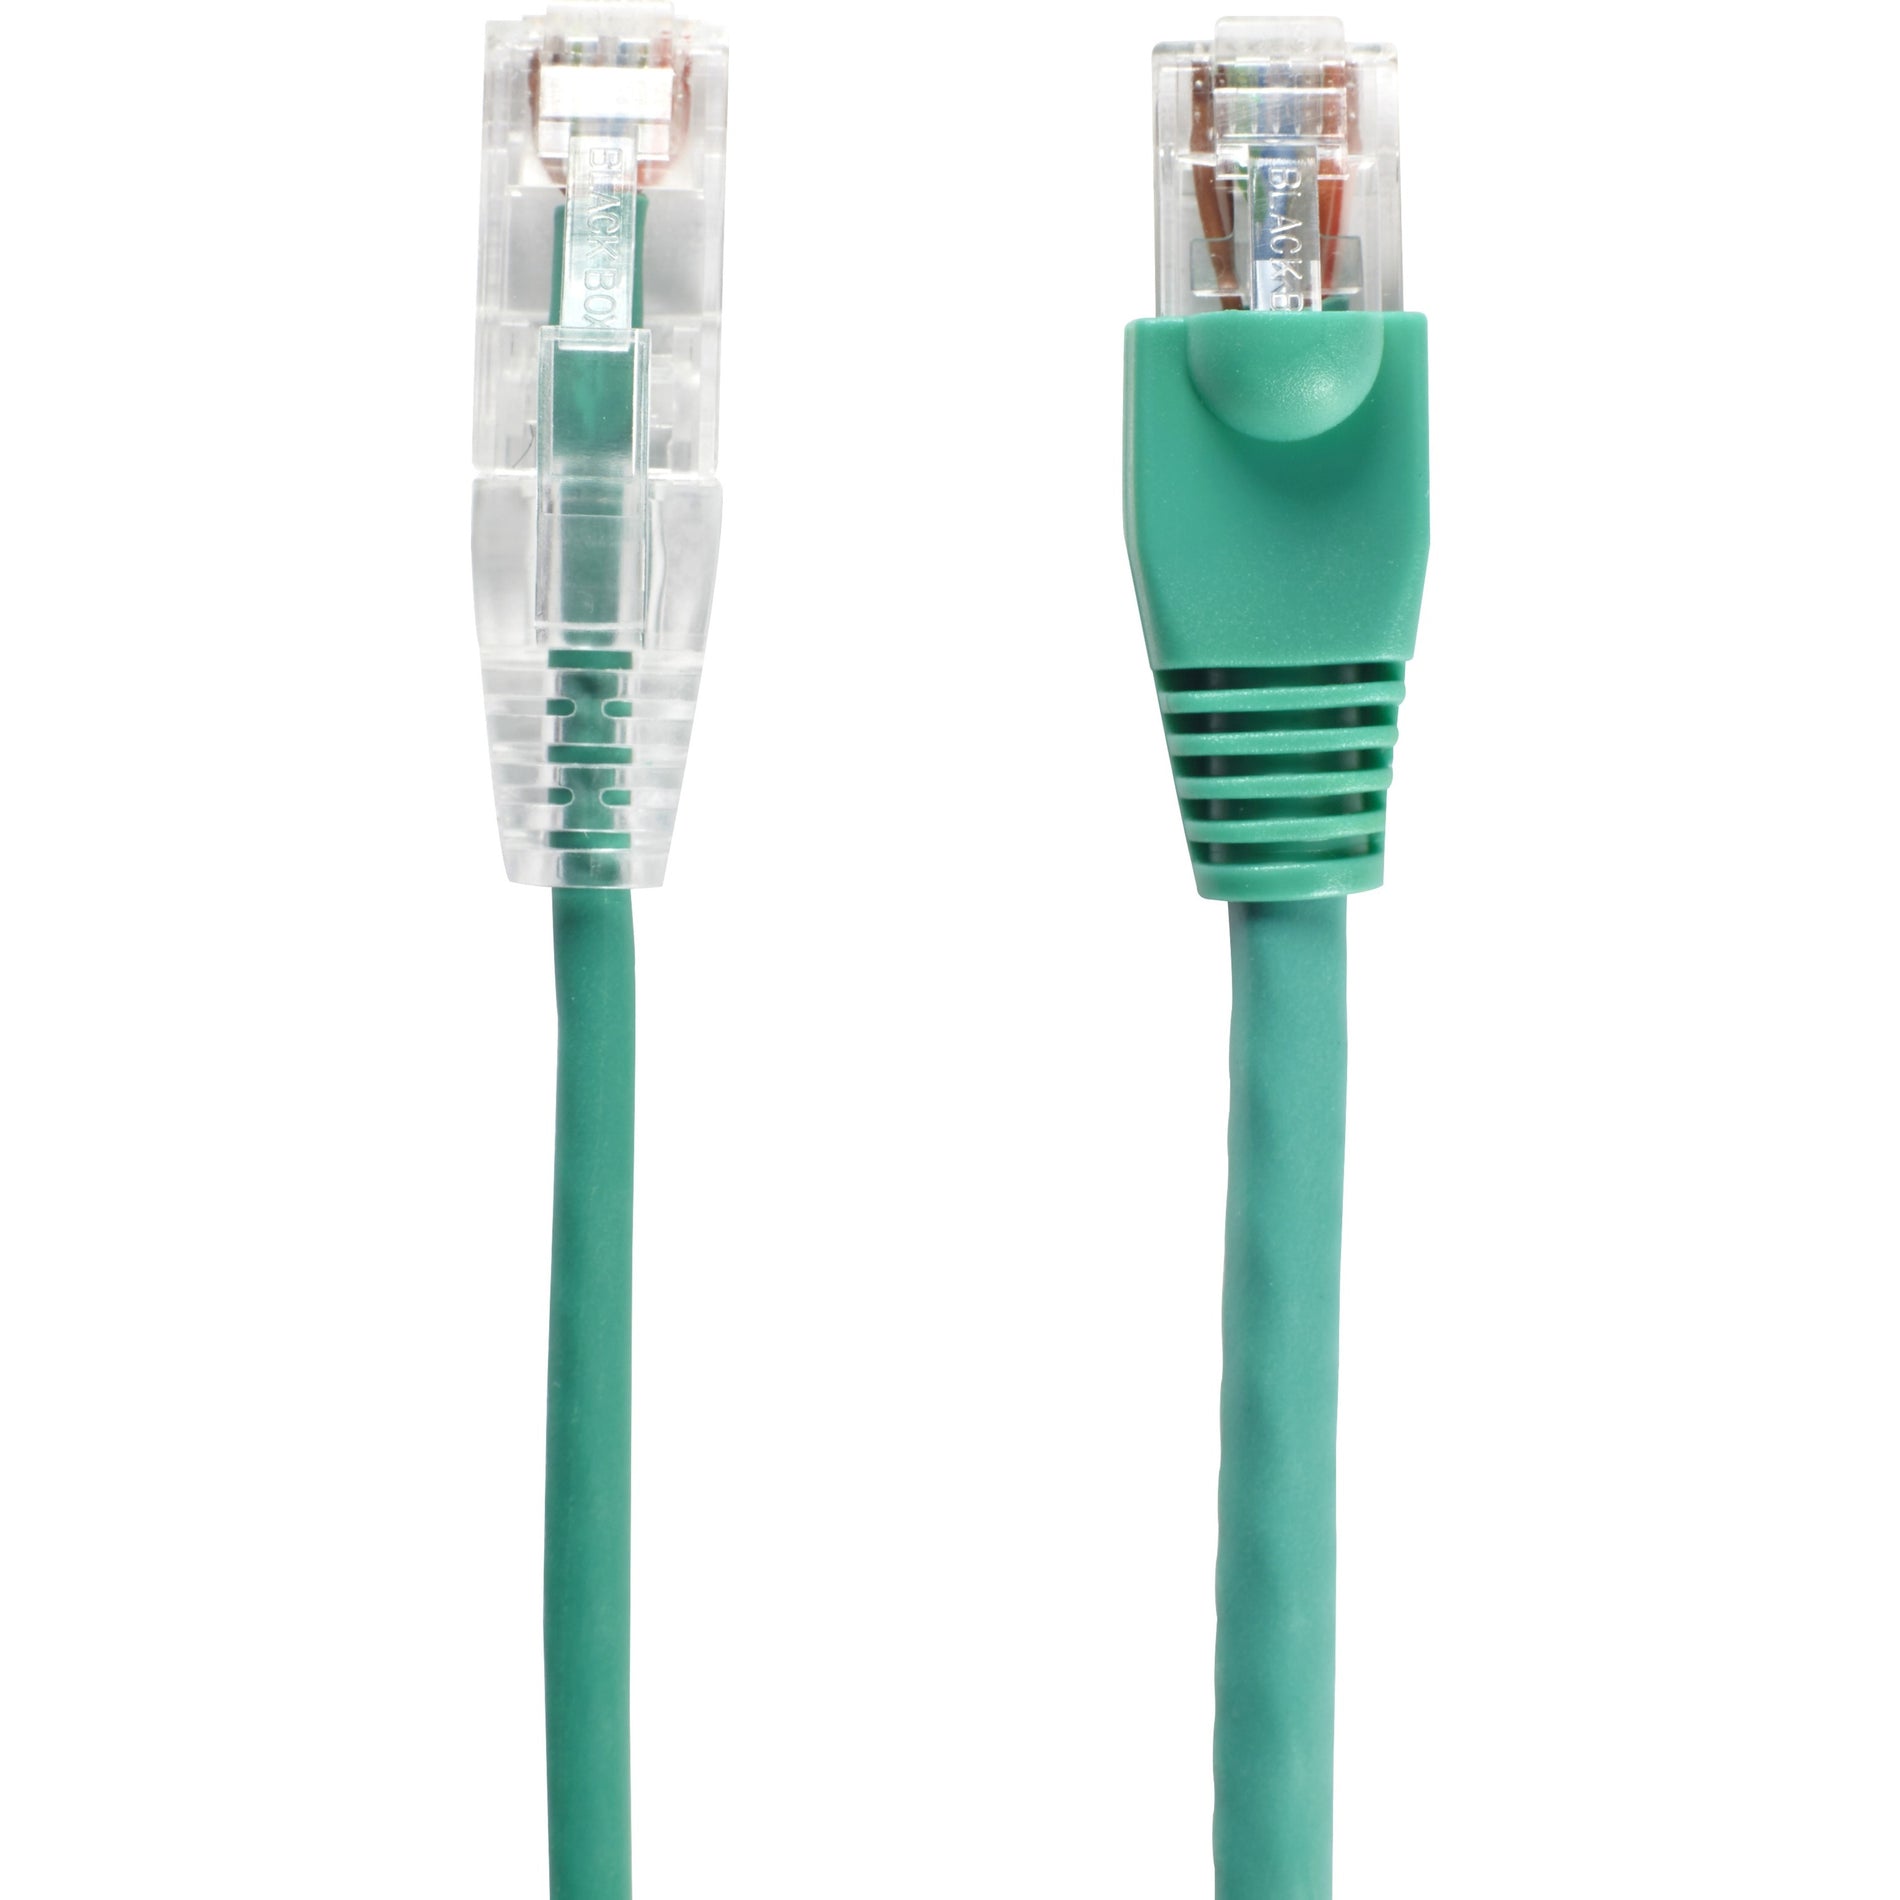 Black Box C6PC28-GN-20 Slim-Net Cat.6 UTP Patch Network Cable, 20 ft, Green